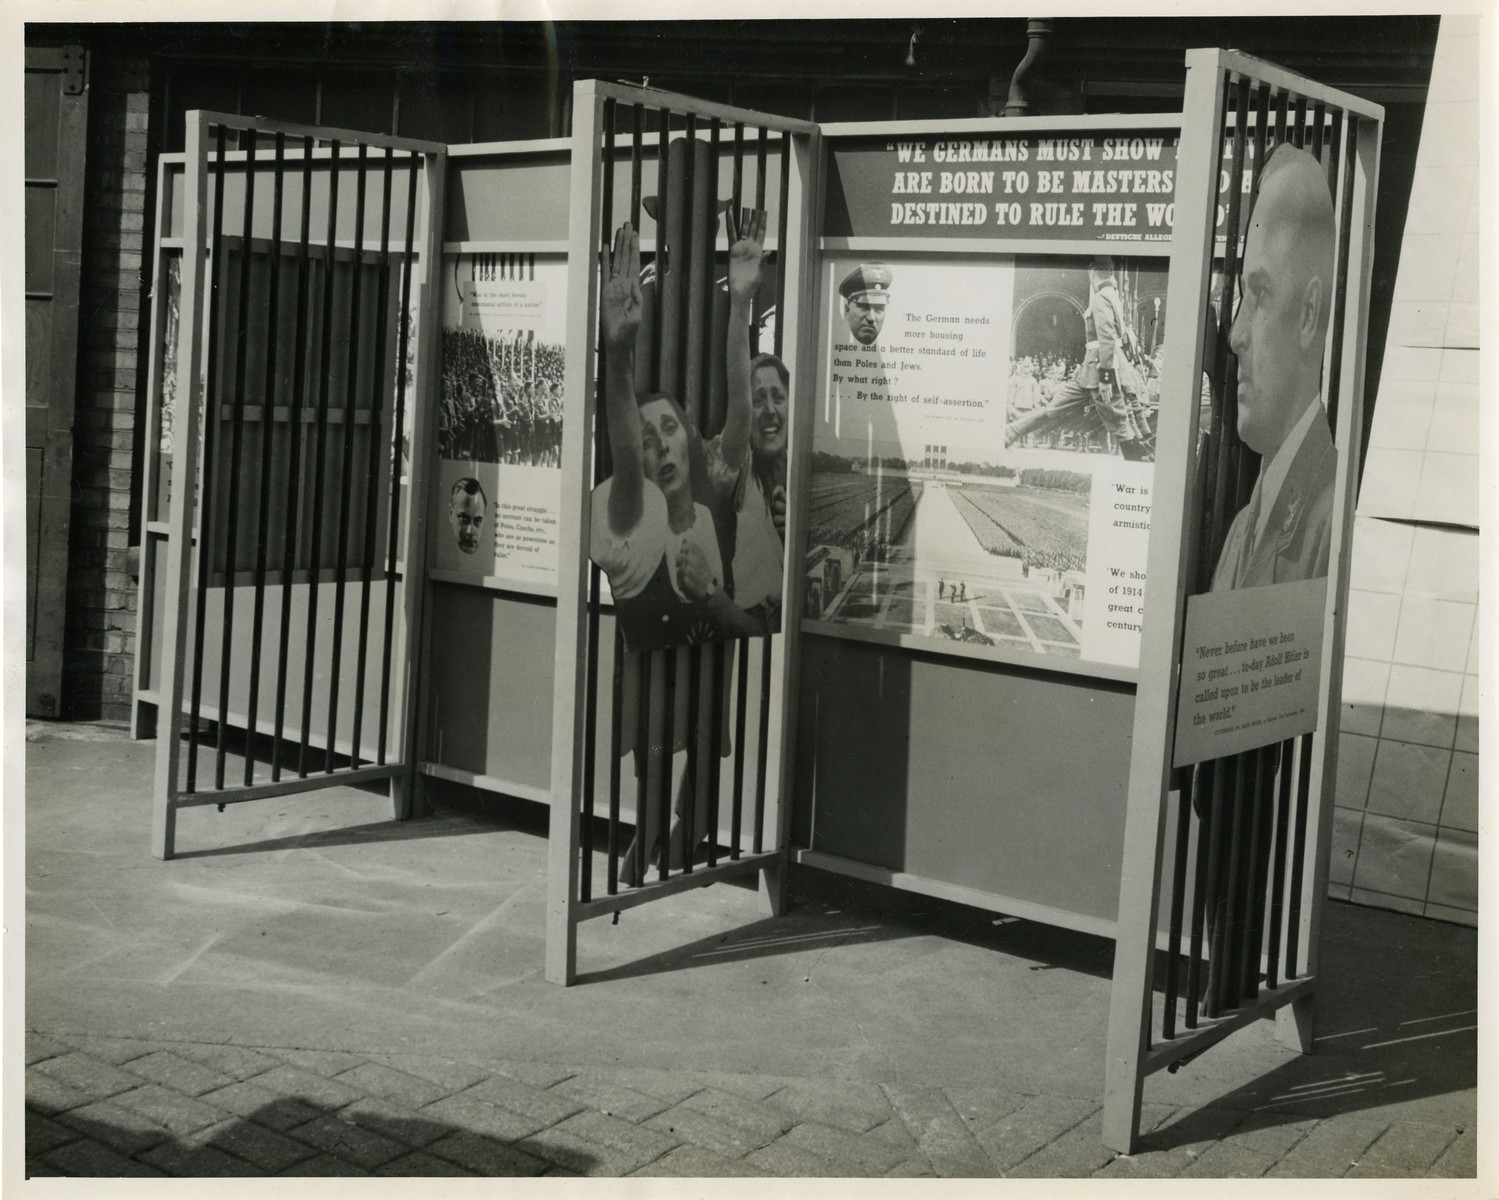 Panel from a 1944 exhibition in London, England, entitled "Germany- the Evidence." 

Quote from the panel reads "We Germans must show that we are born to be masters [and are] destined to rule the world." 

The back of the photo reads "British Official Photograph; Distrbuted by the Ministry of Information. D. ; The Evil We Fight.; Ministry of Information Exhibition priduced by Display & Exhibitions Division for show all over Great Britain.; Display panel"